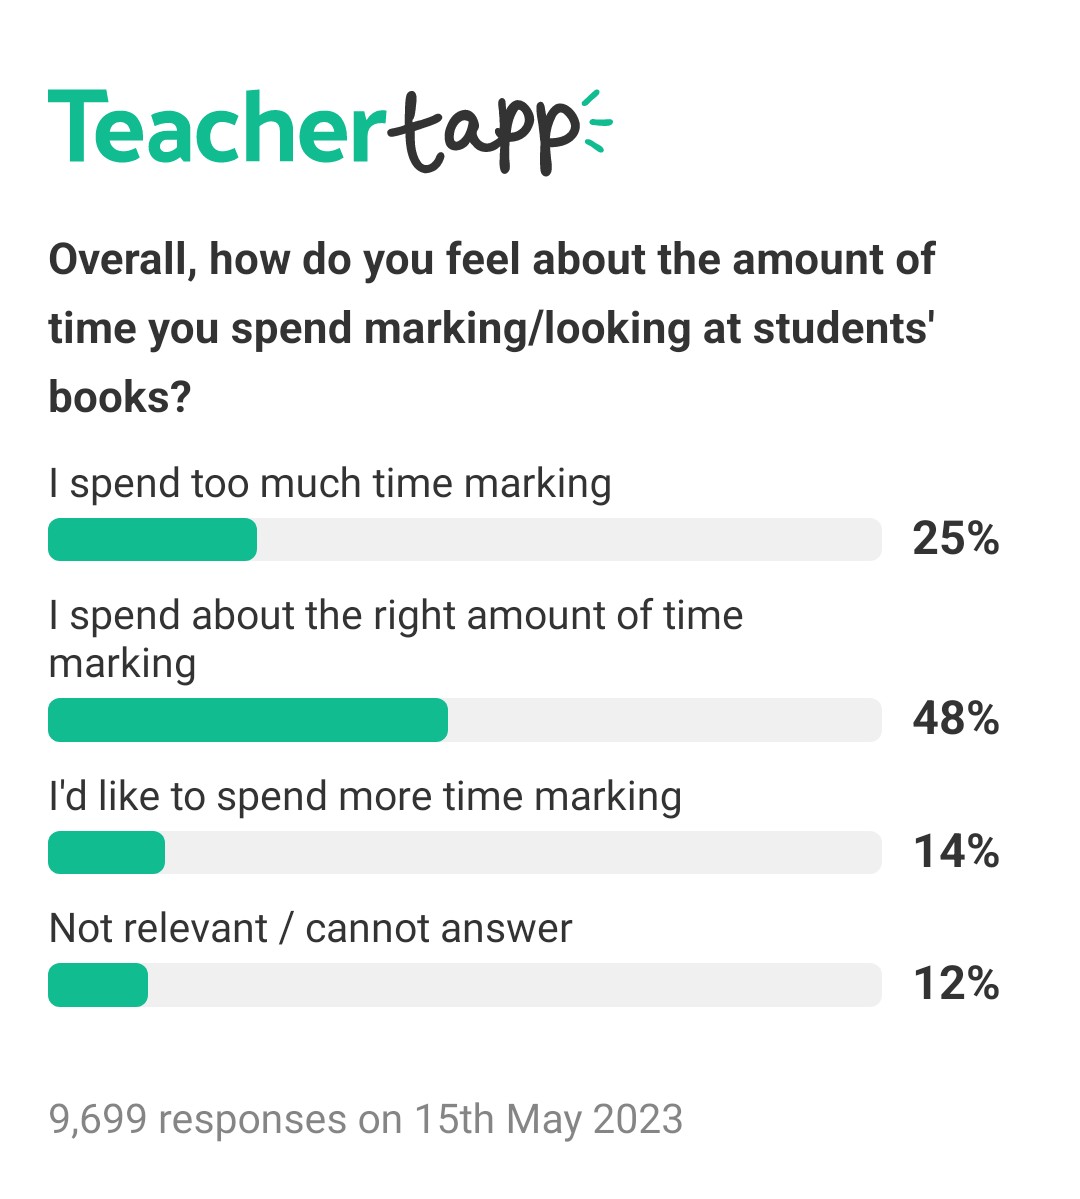 It is great to see that school leaders and teachers have found workload friendly ways to mark. I haven't taken any ex.books or summative assessments home in years, and it feels great! #smartfeedback #teachertapp

Here's what teachers responded yesterday on teachertapp.co.uk